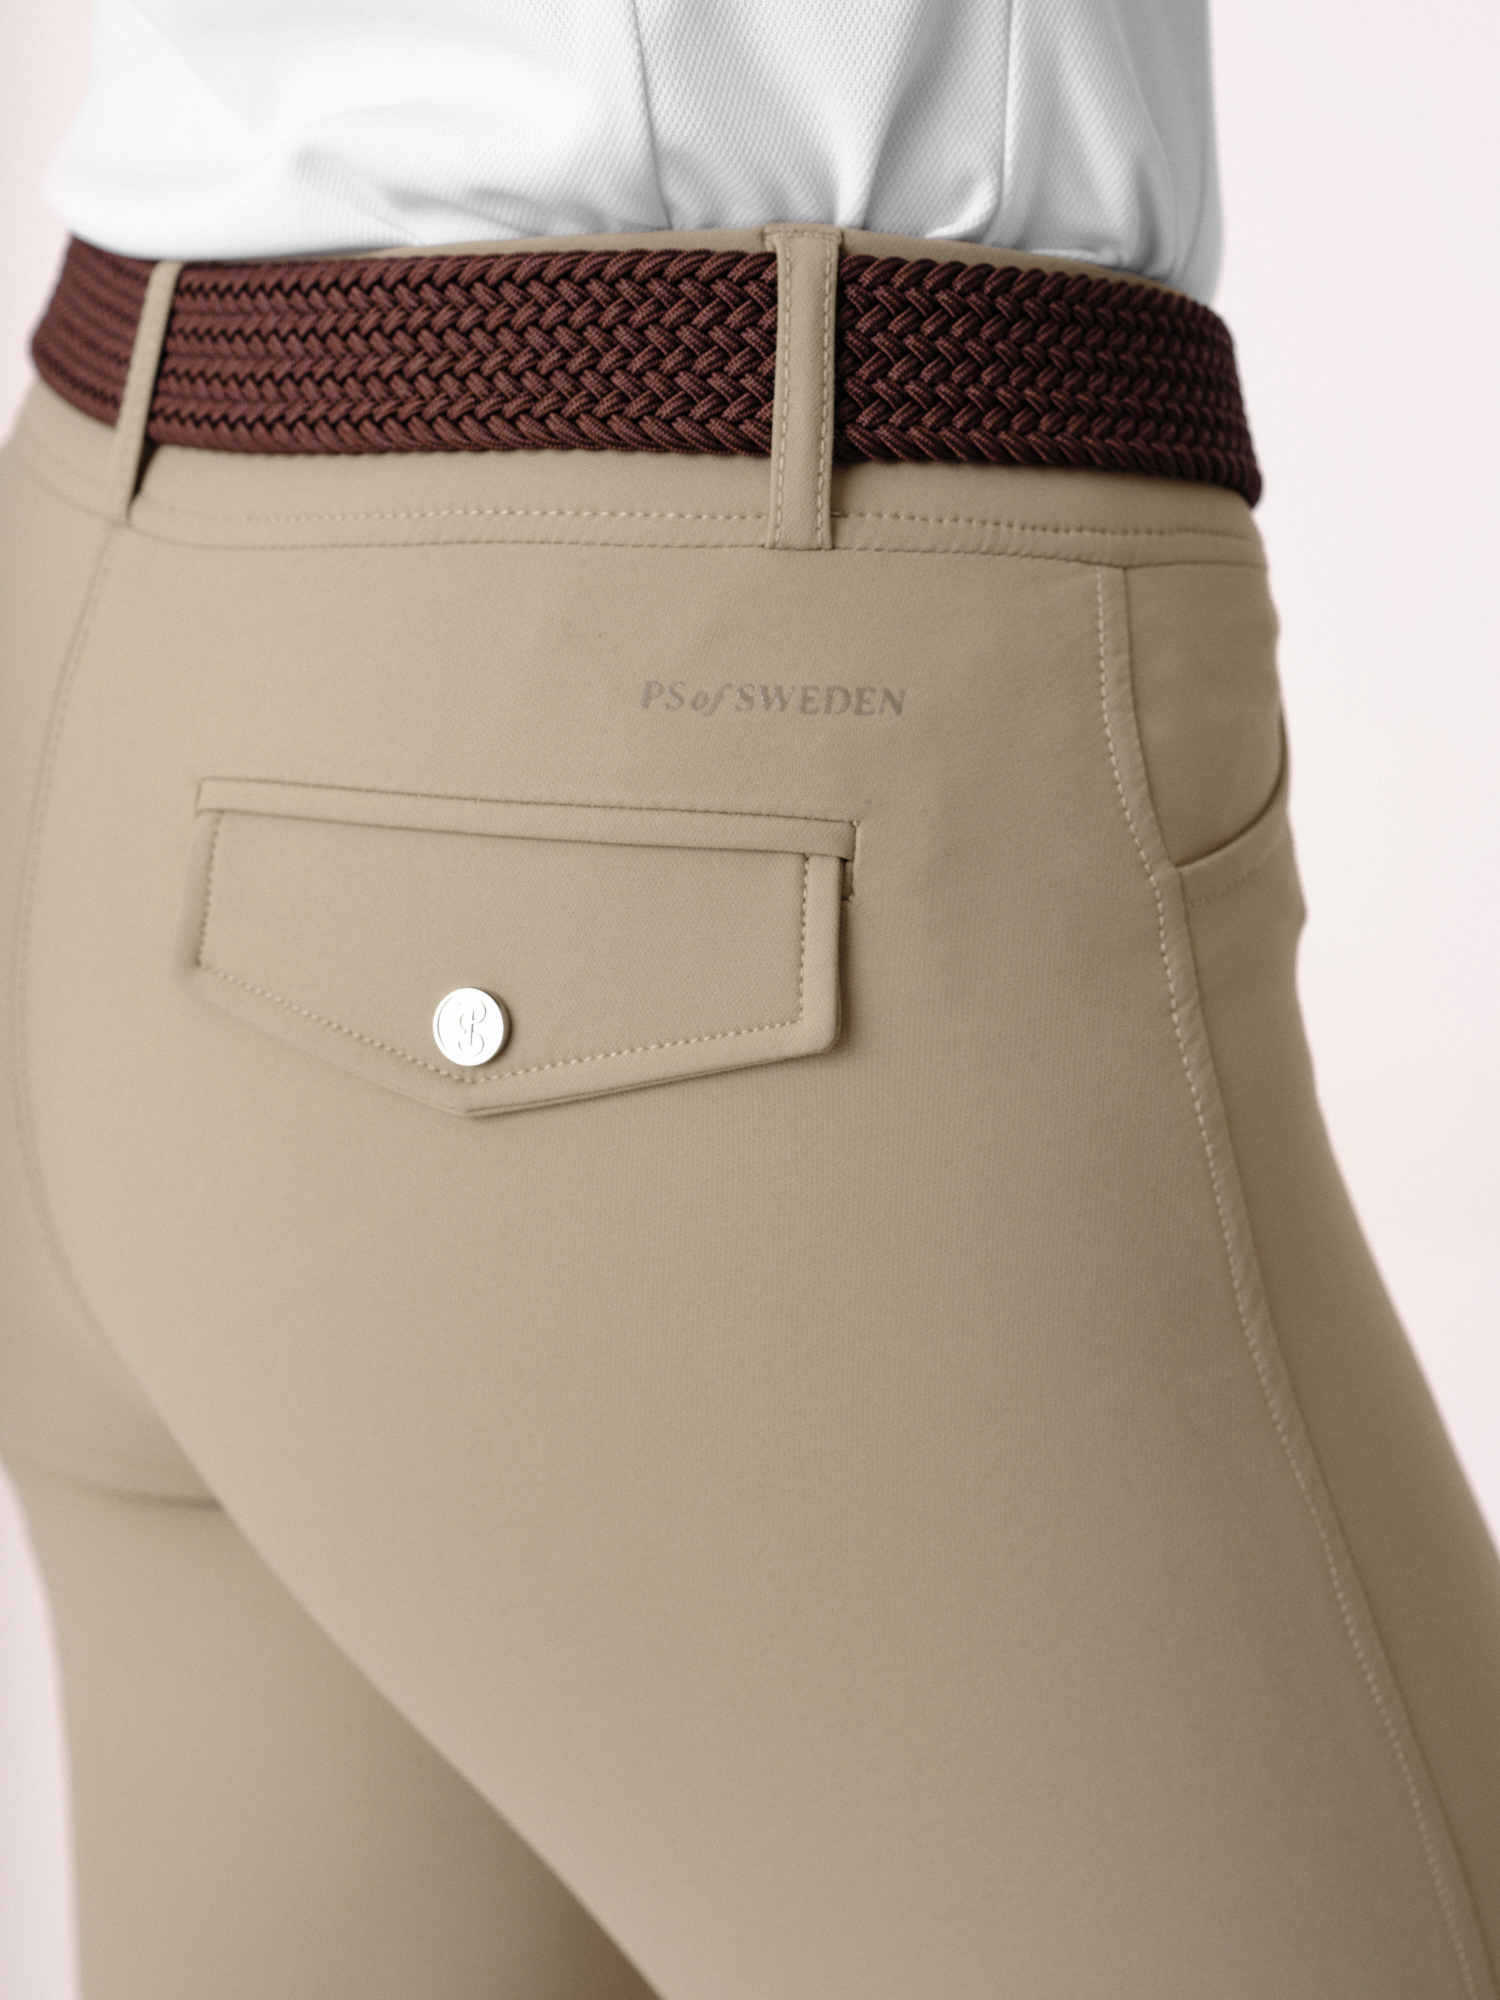 Shires Saddlehugger Breeches - Gents – Just Horse Riders